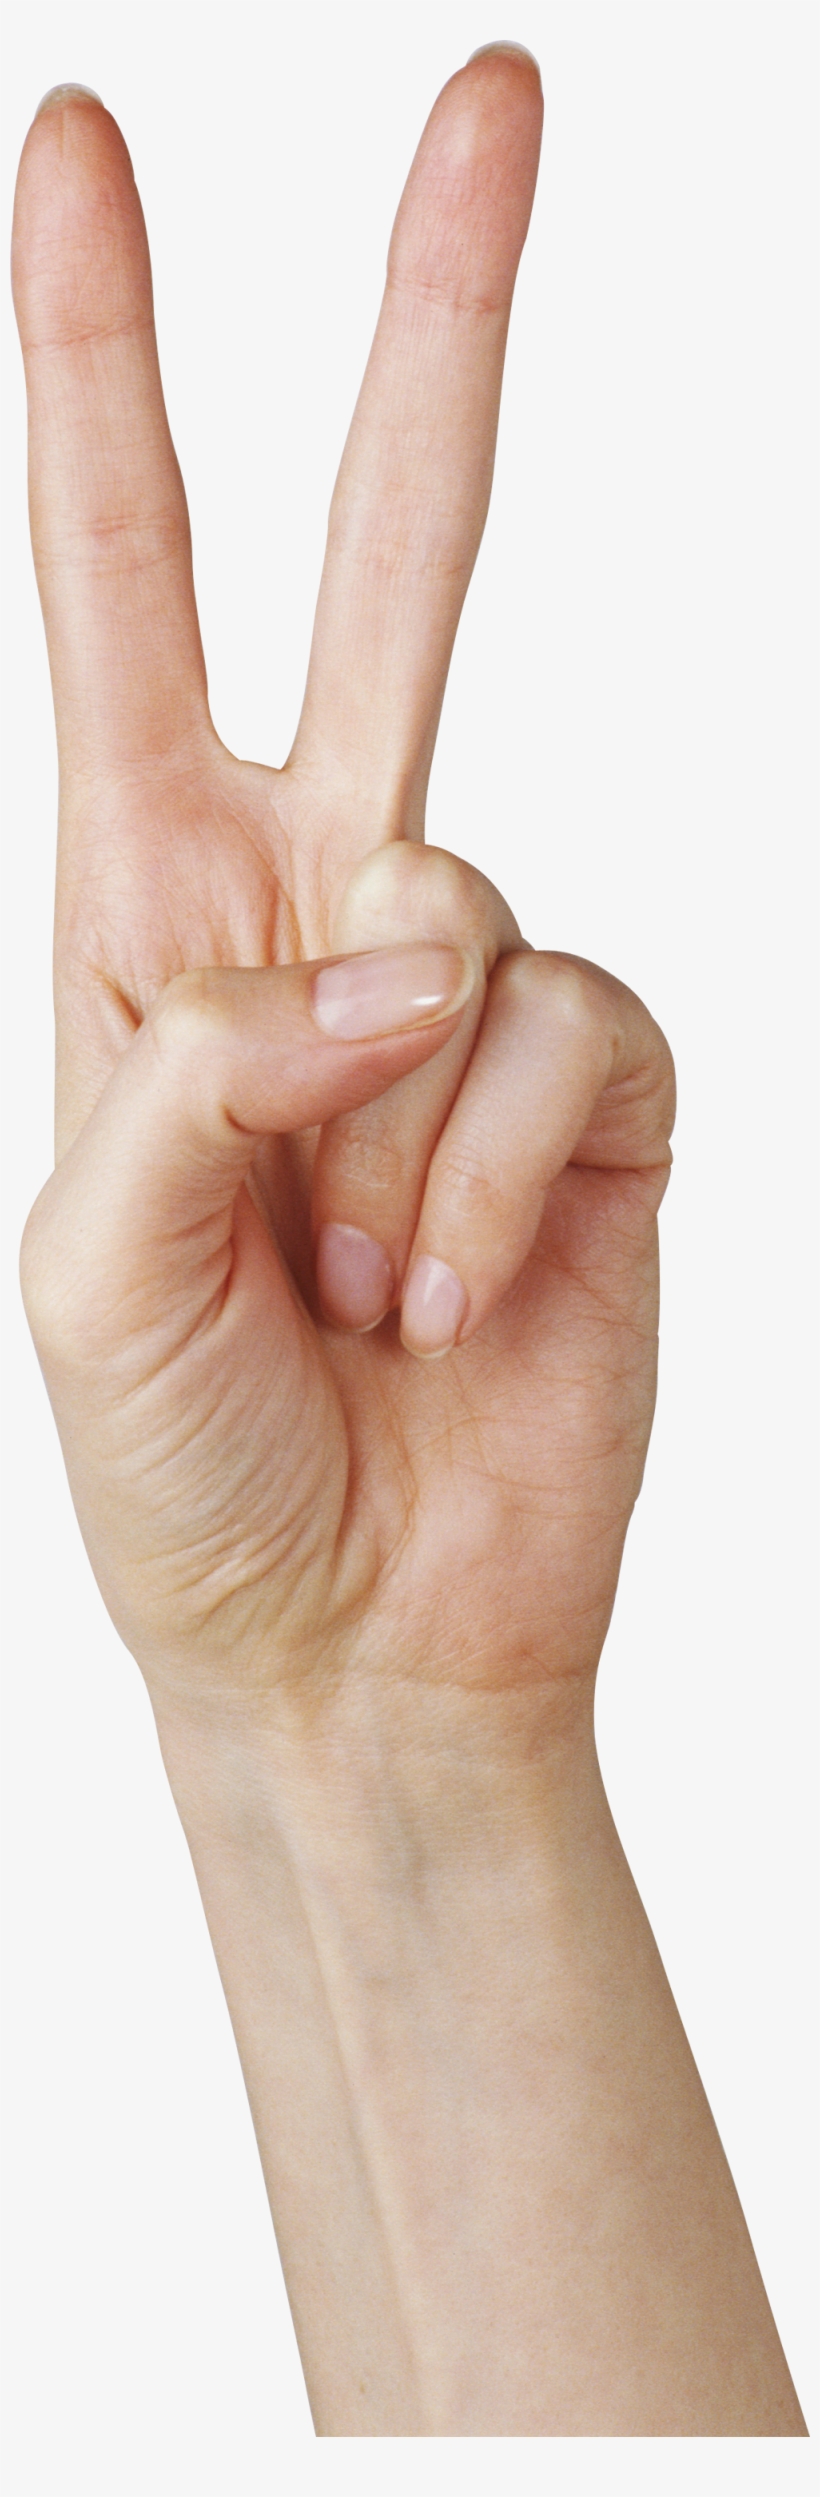 Hands Png Free Images - Hand 2 Png, transparent png #575357